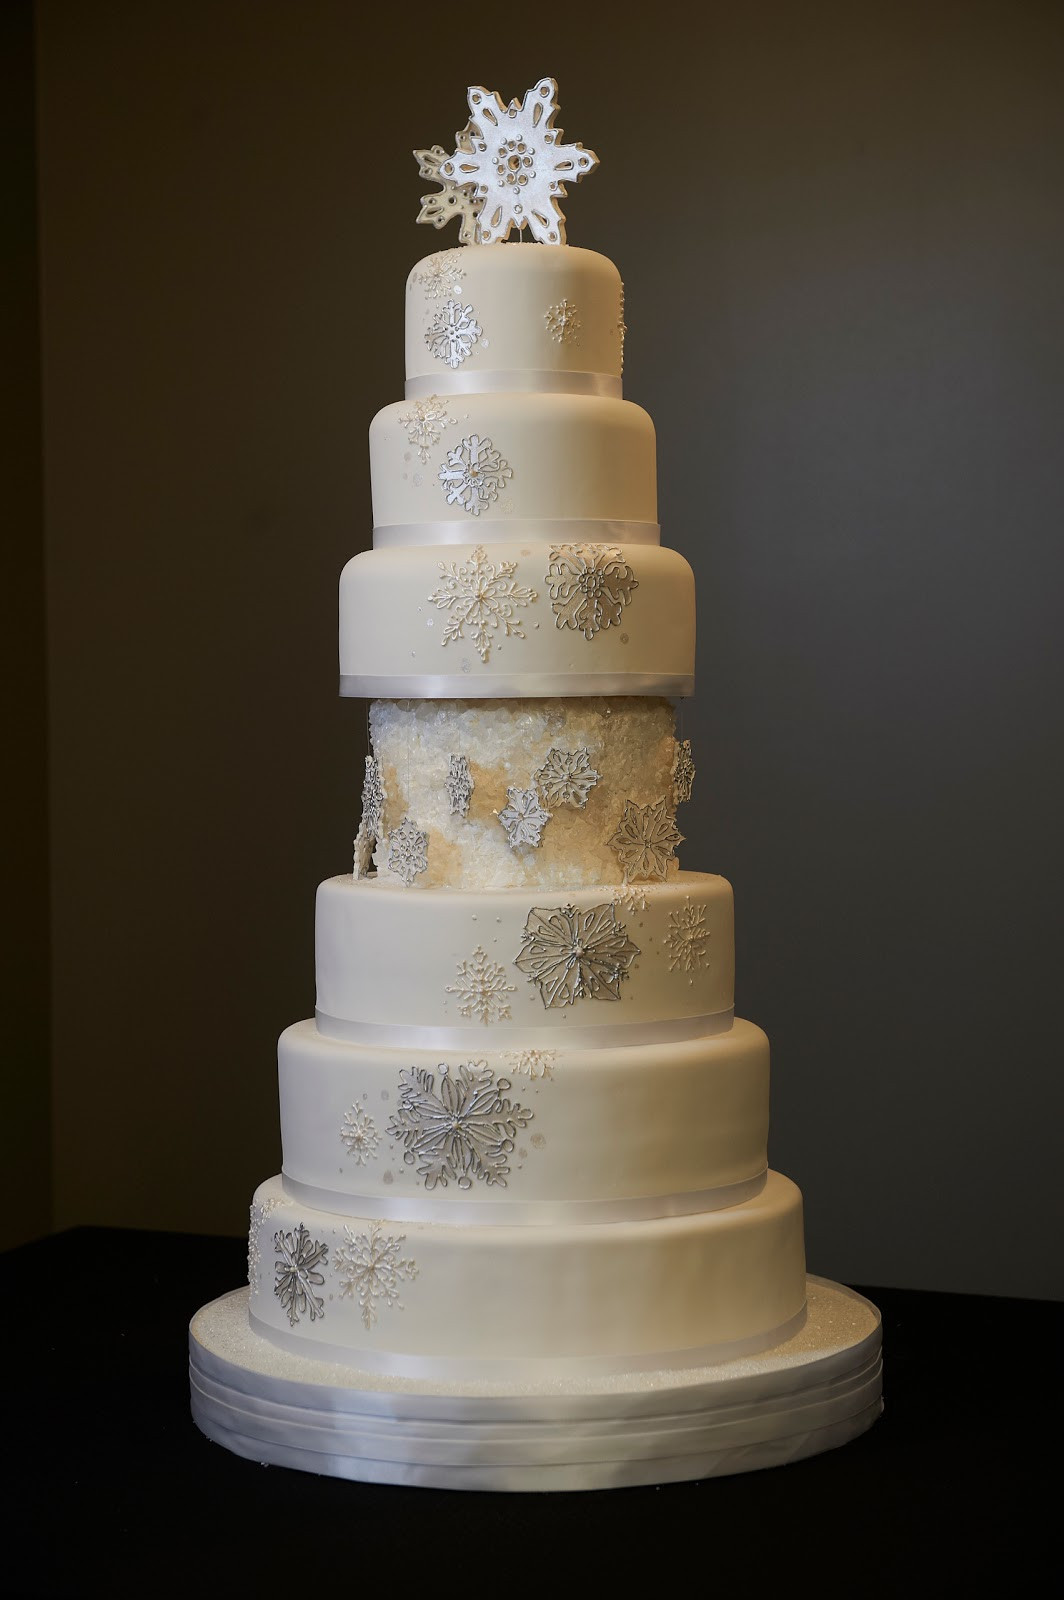 Amazing Wedding Cakes Show
 A Touch of Class Cakes Amazing Wedding Cakes Sneak Peek